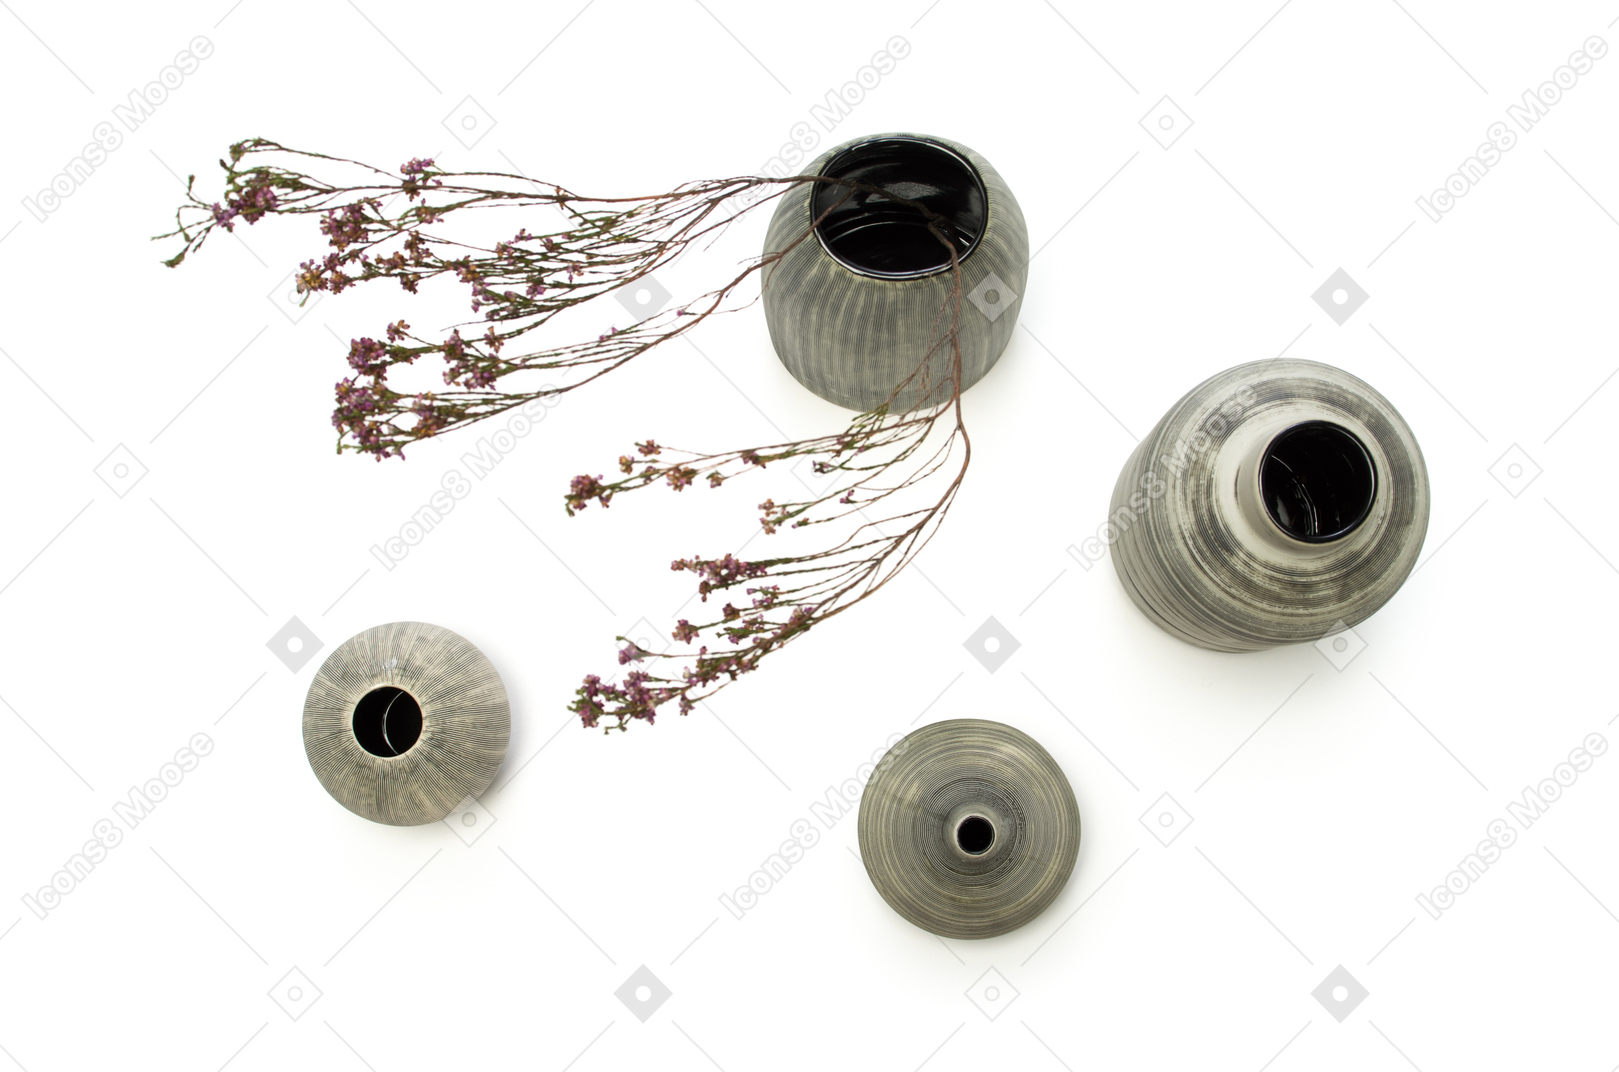 Four vases with dried flowers